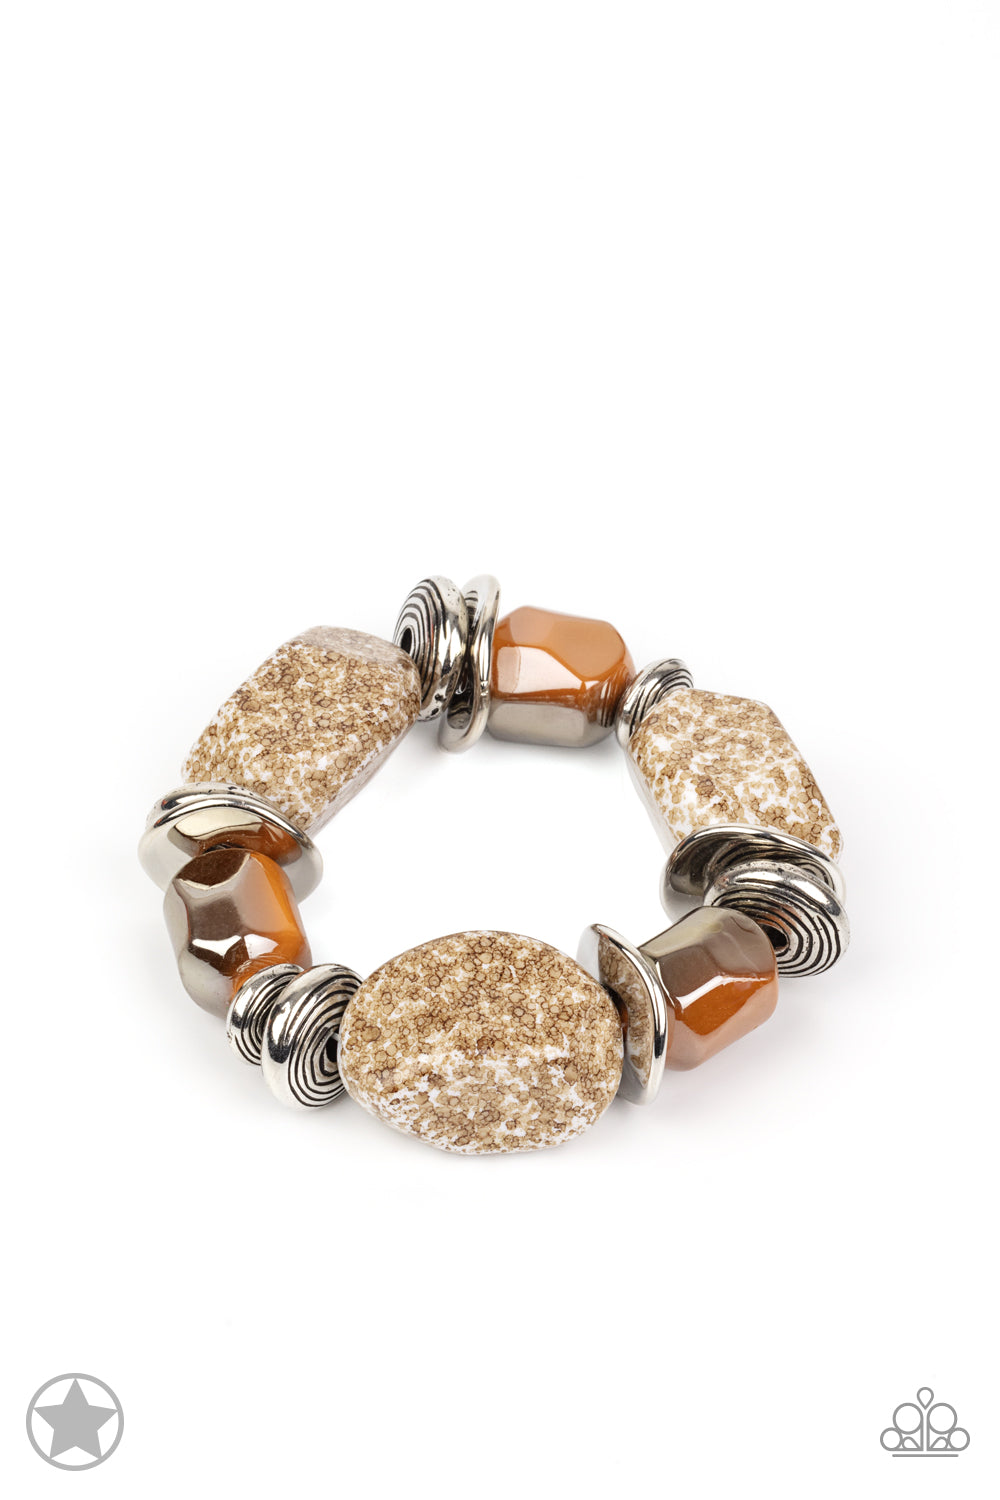 Chunky peach beads combine with intricate silver details on a stretchy band. Matches Blockbuster Necklace. All Paparazzi Accessories are nickel-free and lead free.